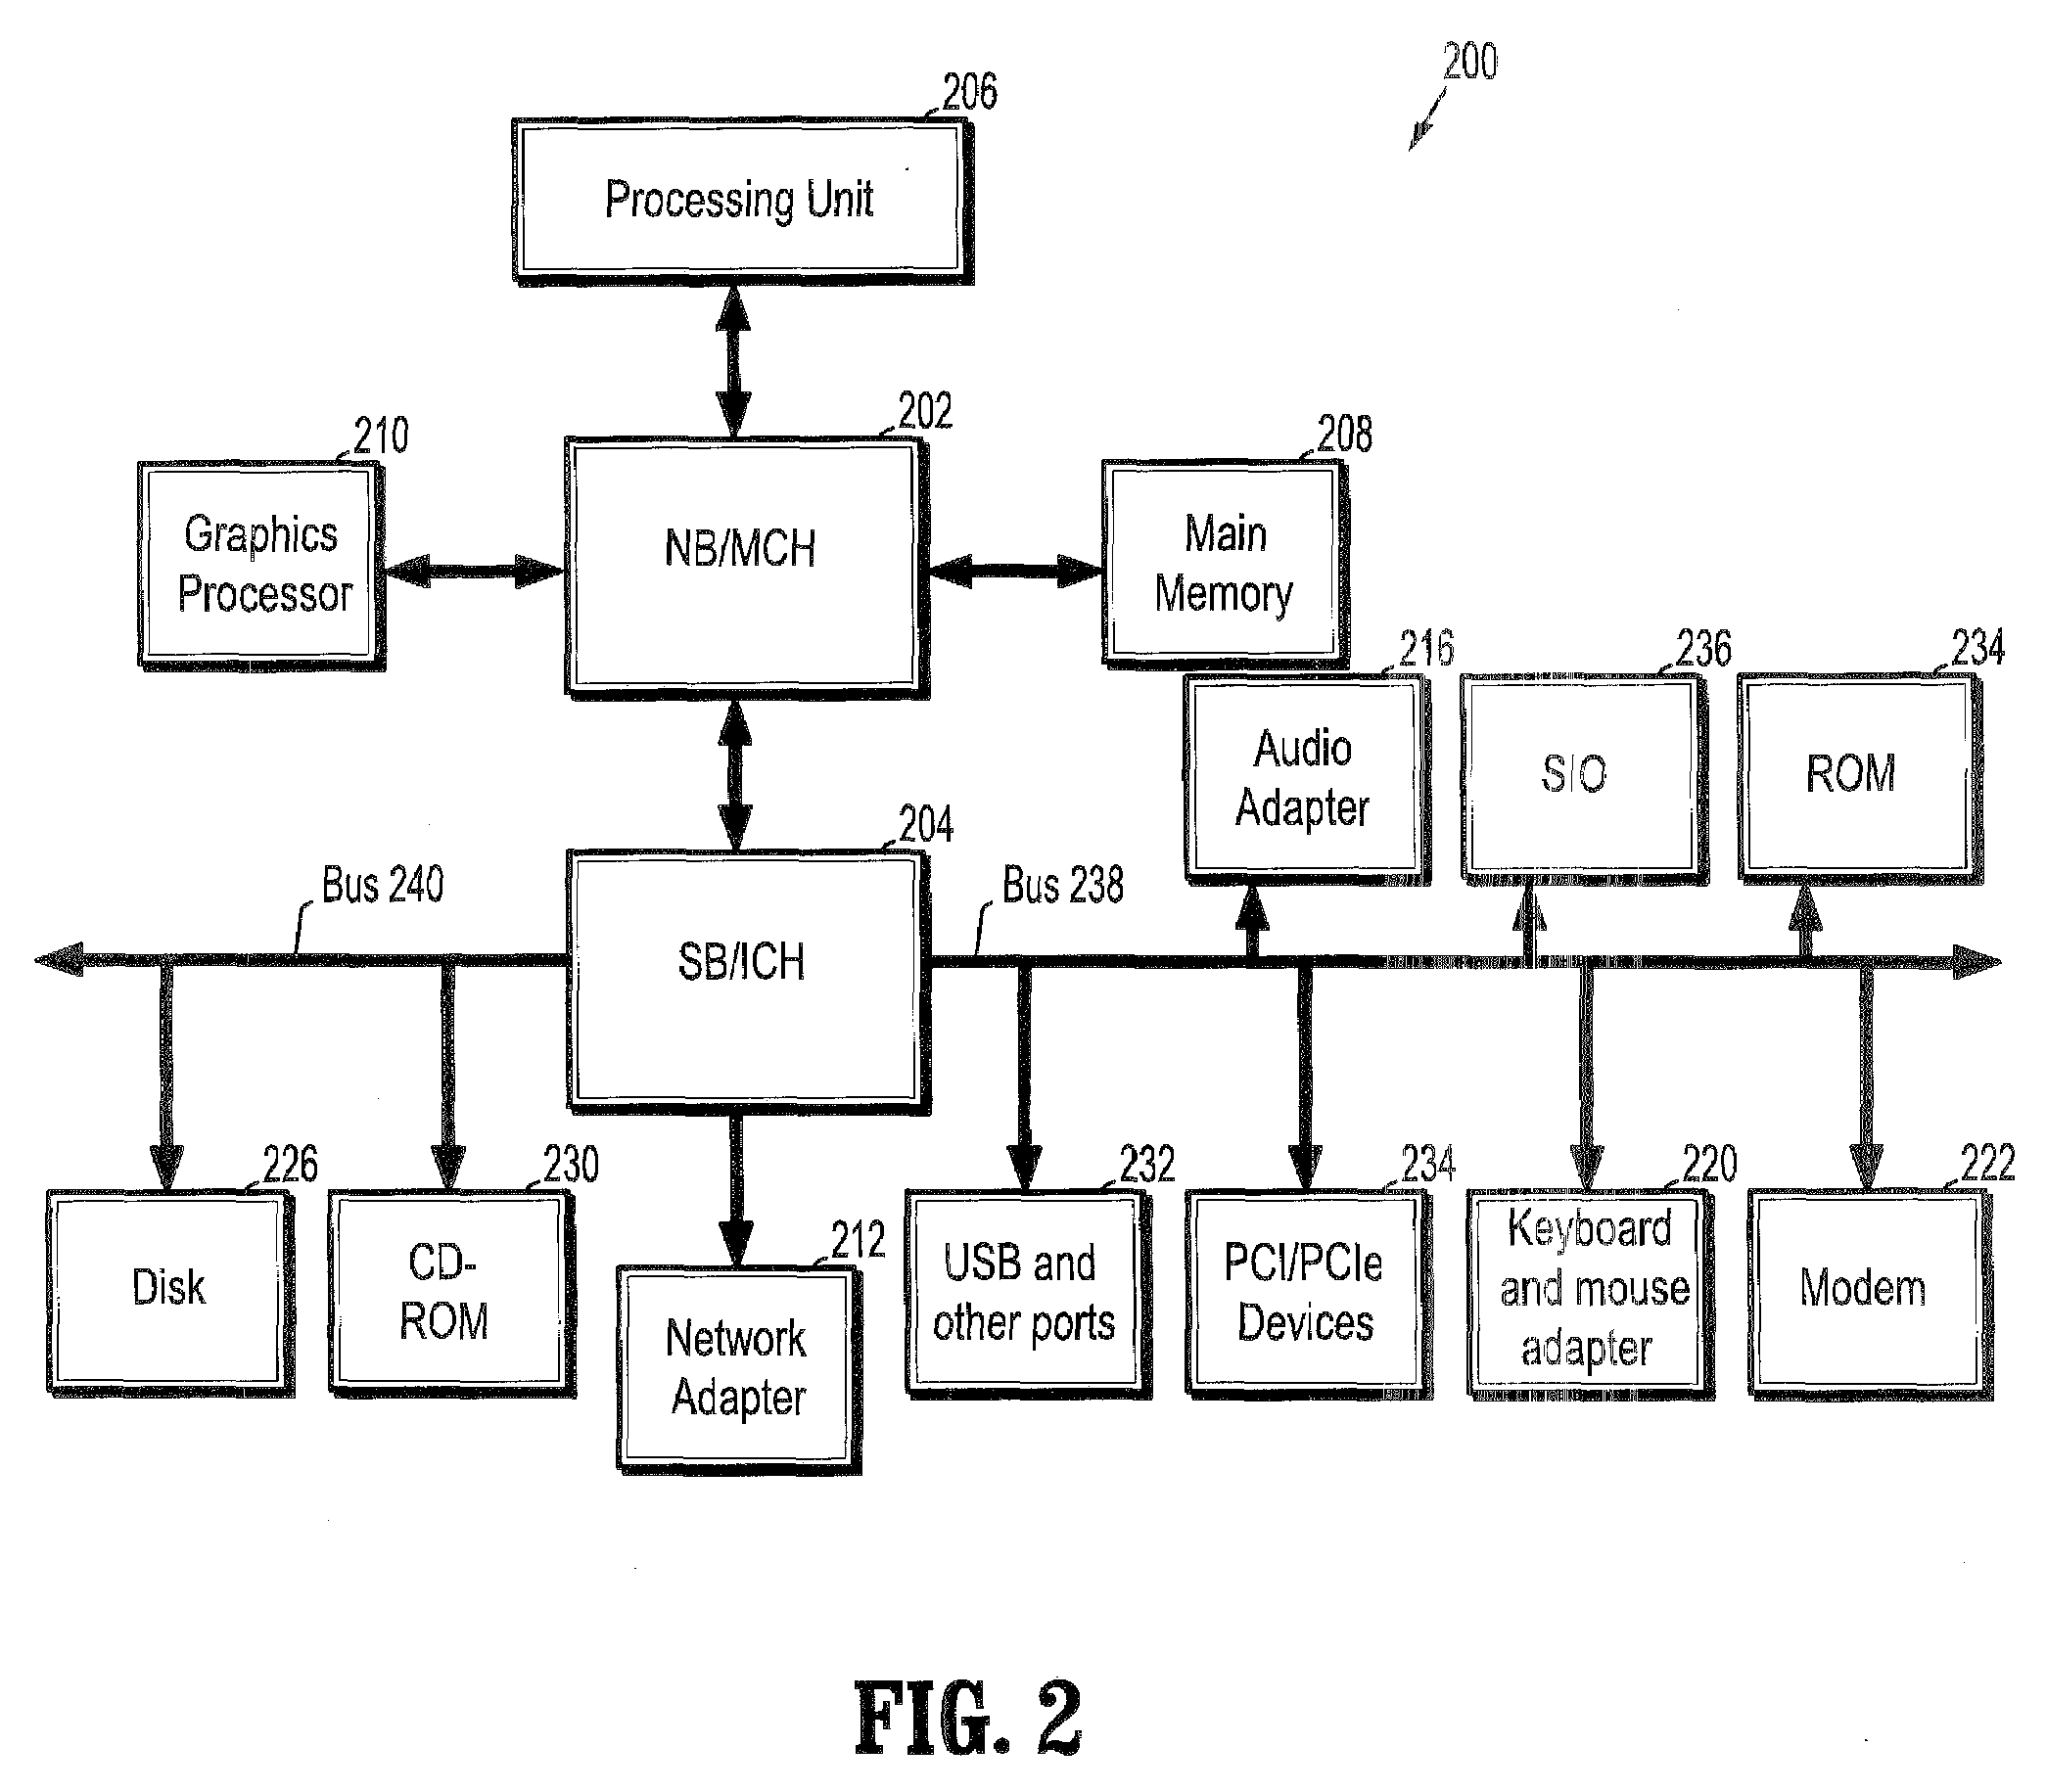 System and method for security planning with soft security constraints